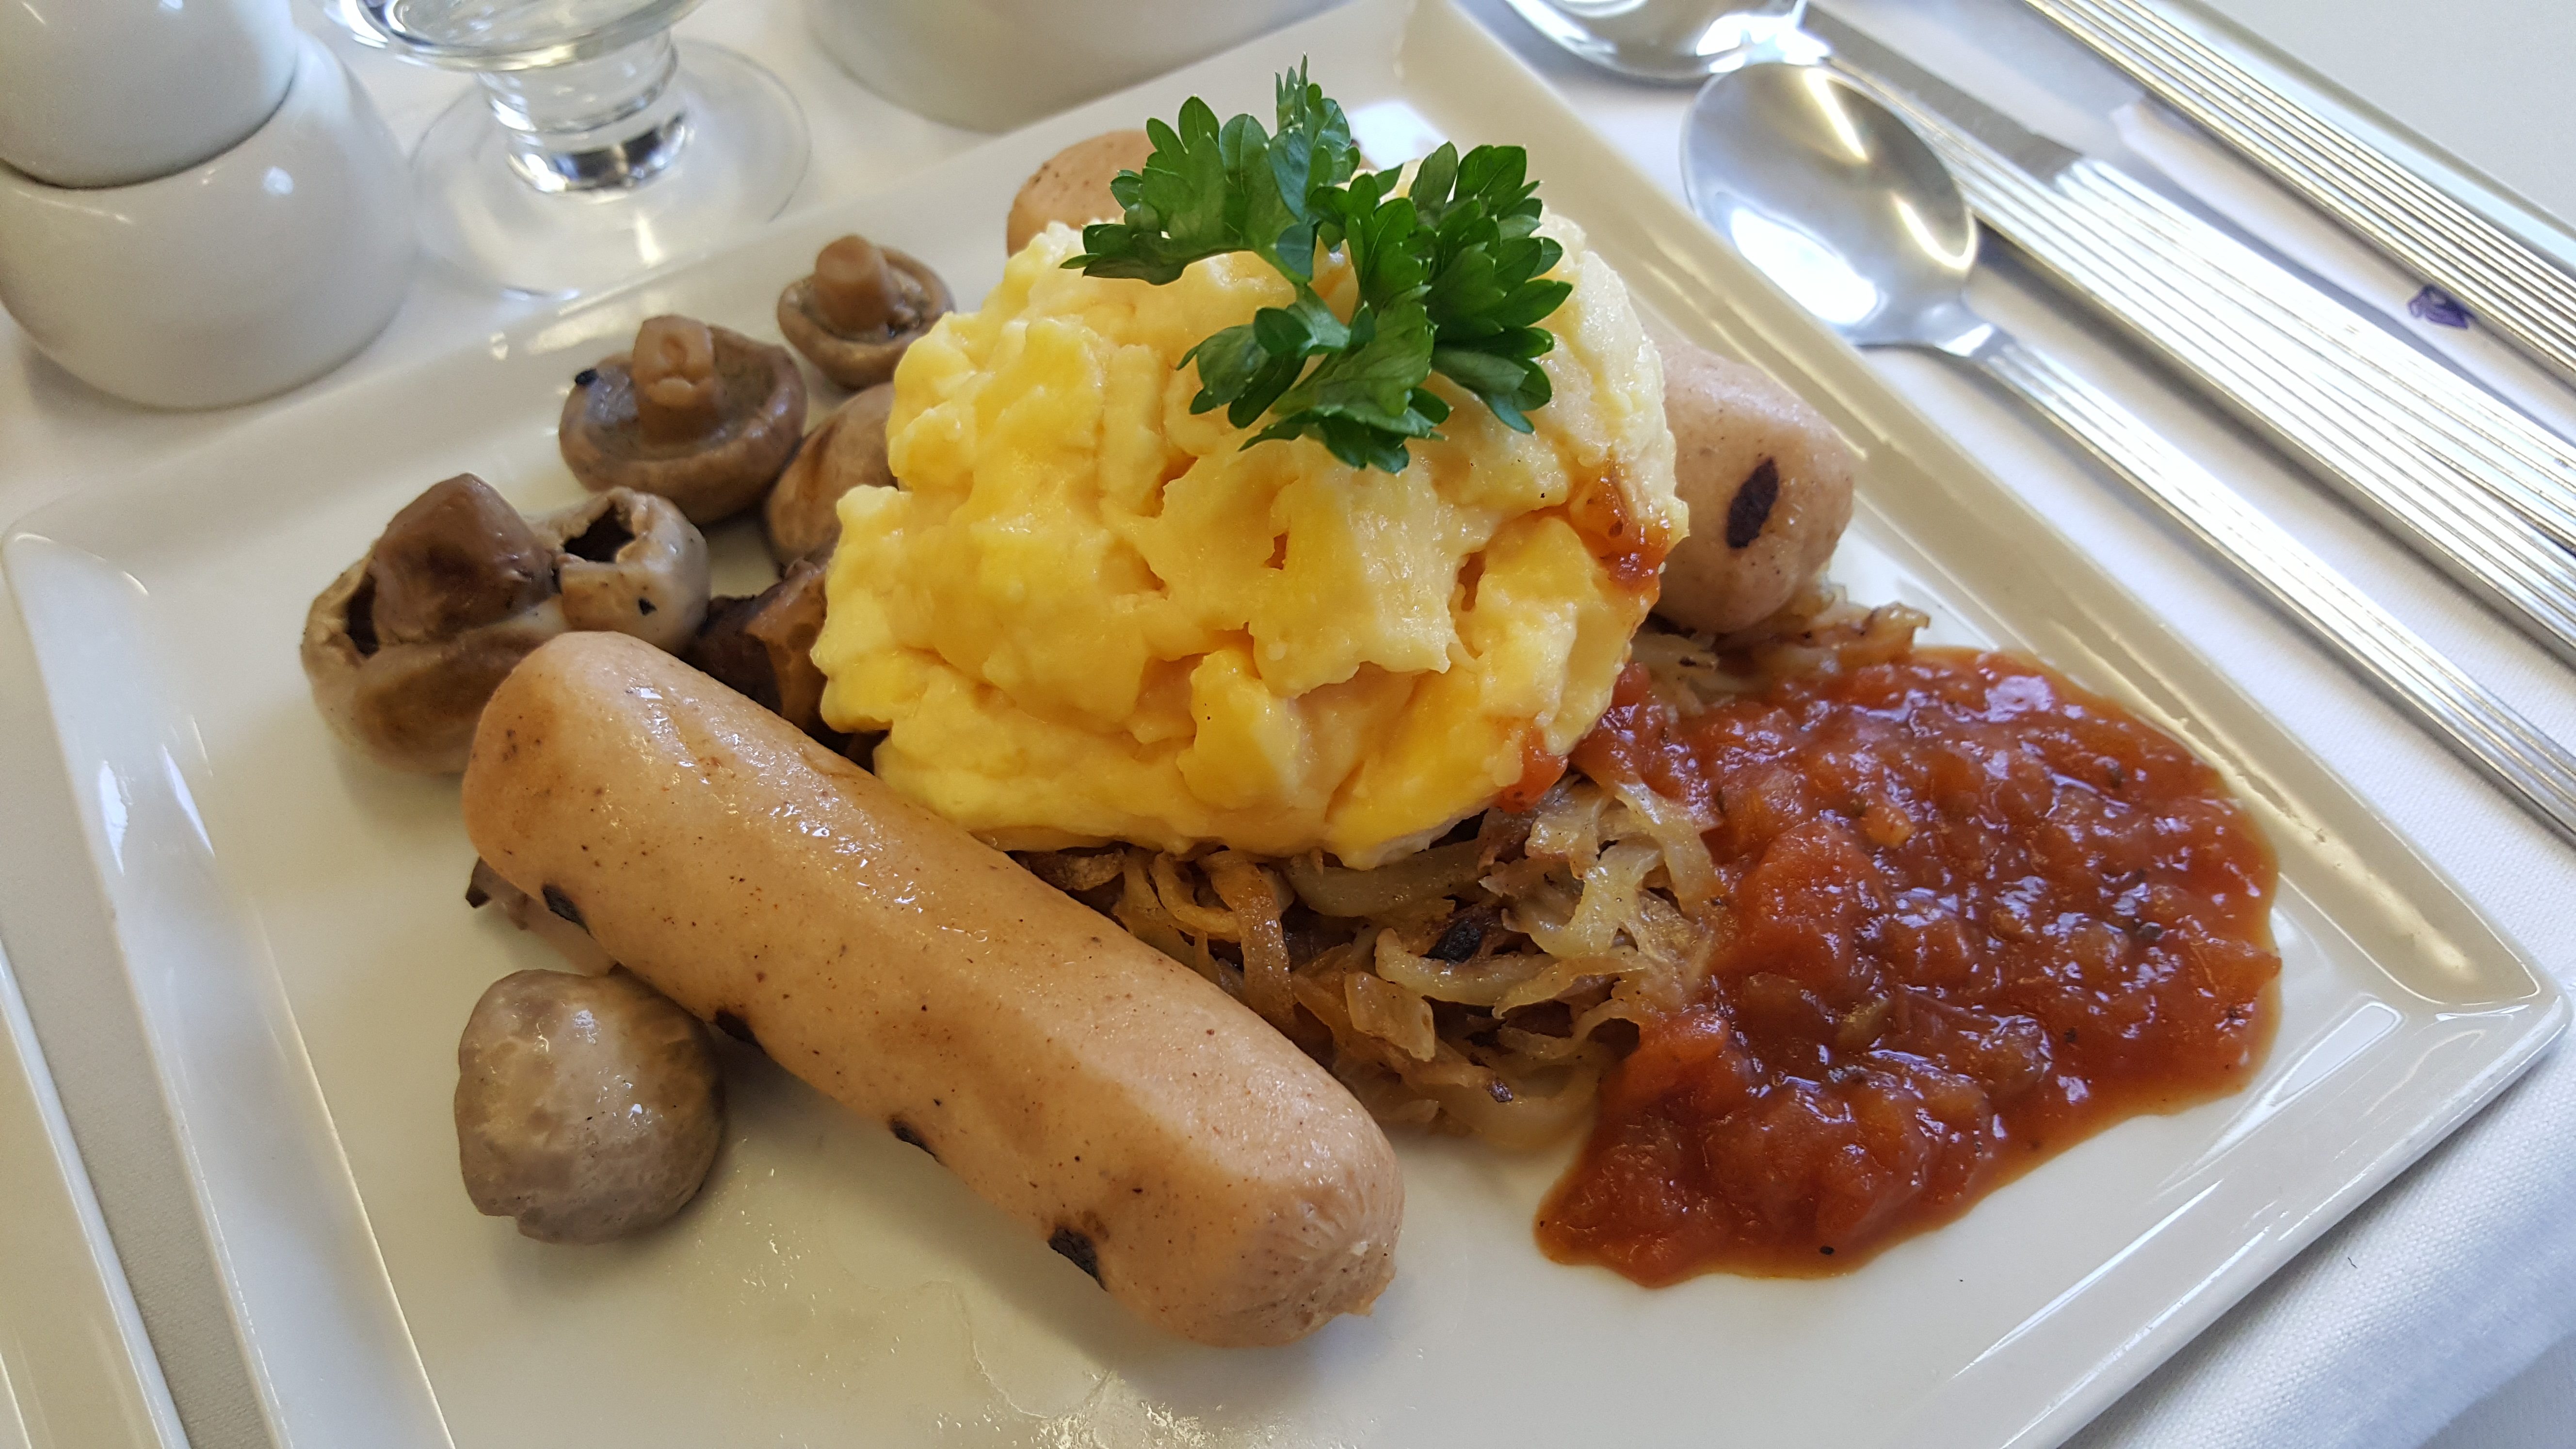 FIRST CLASS BREAKFAST. Sausage, eggs, and mushrooms  